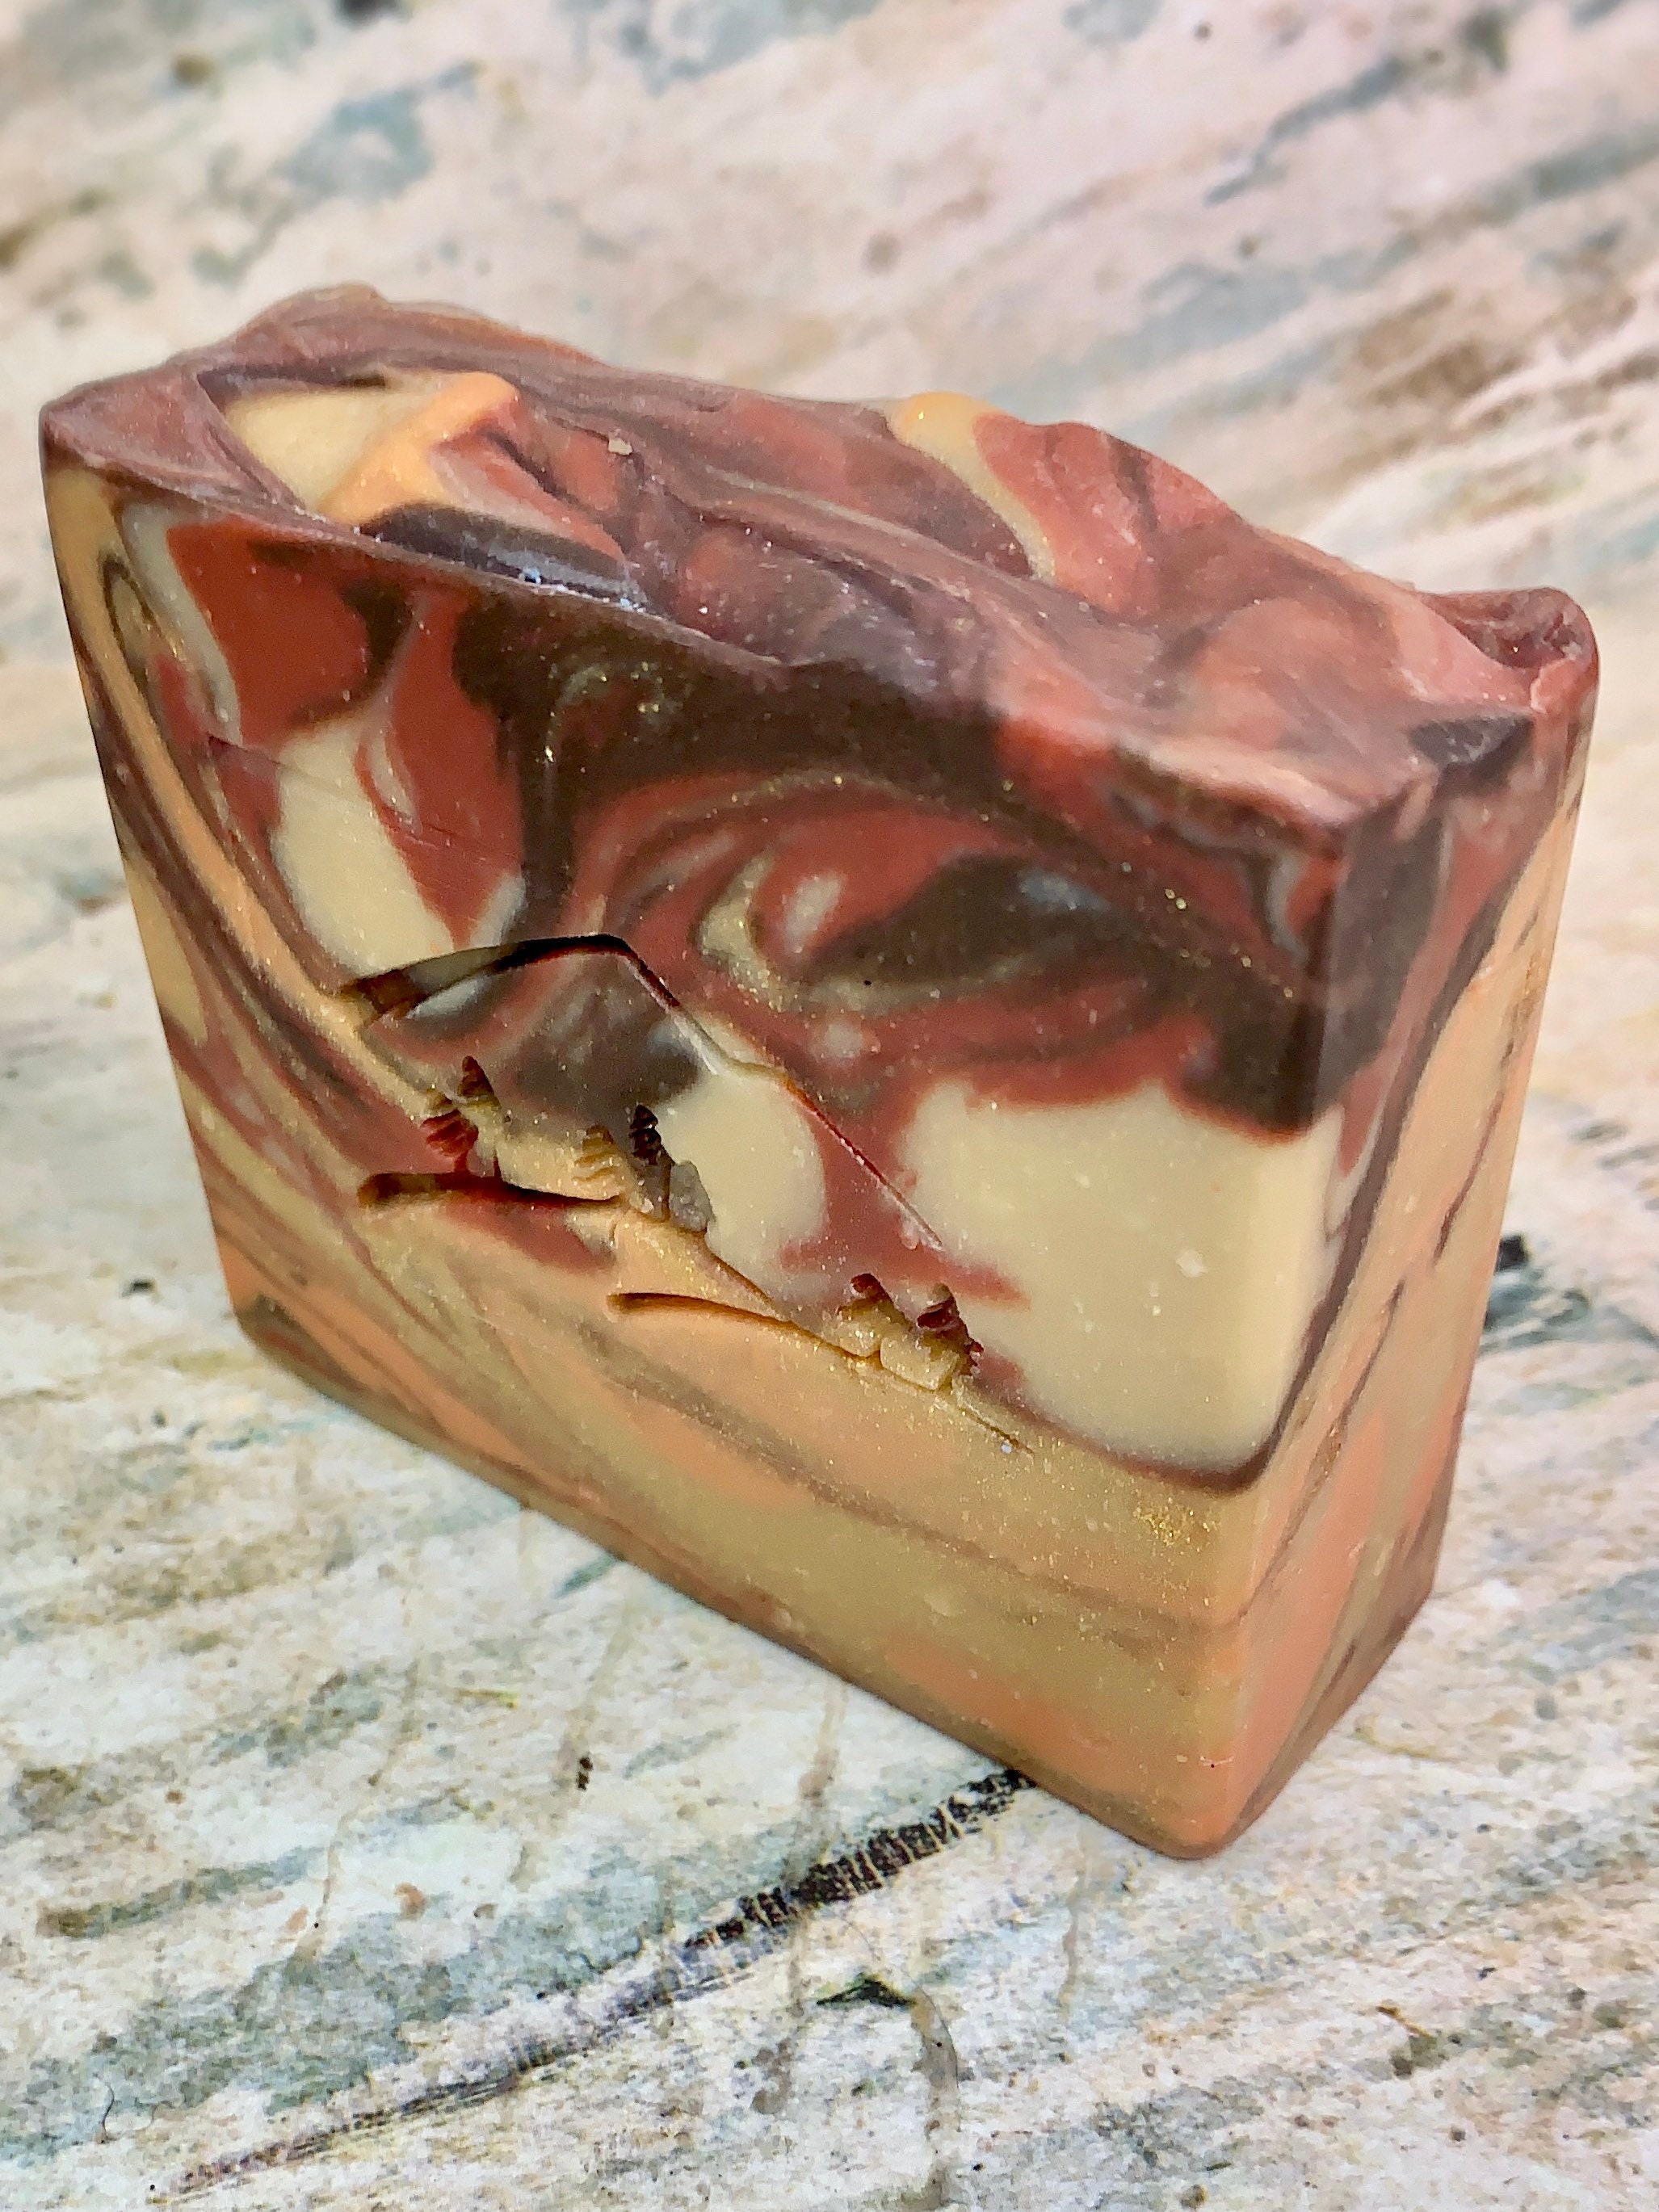  Dog Poop Soap Vegan Gag Gift Peppermint Scent : Handmade  Products